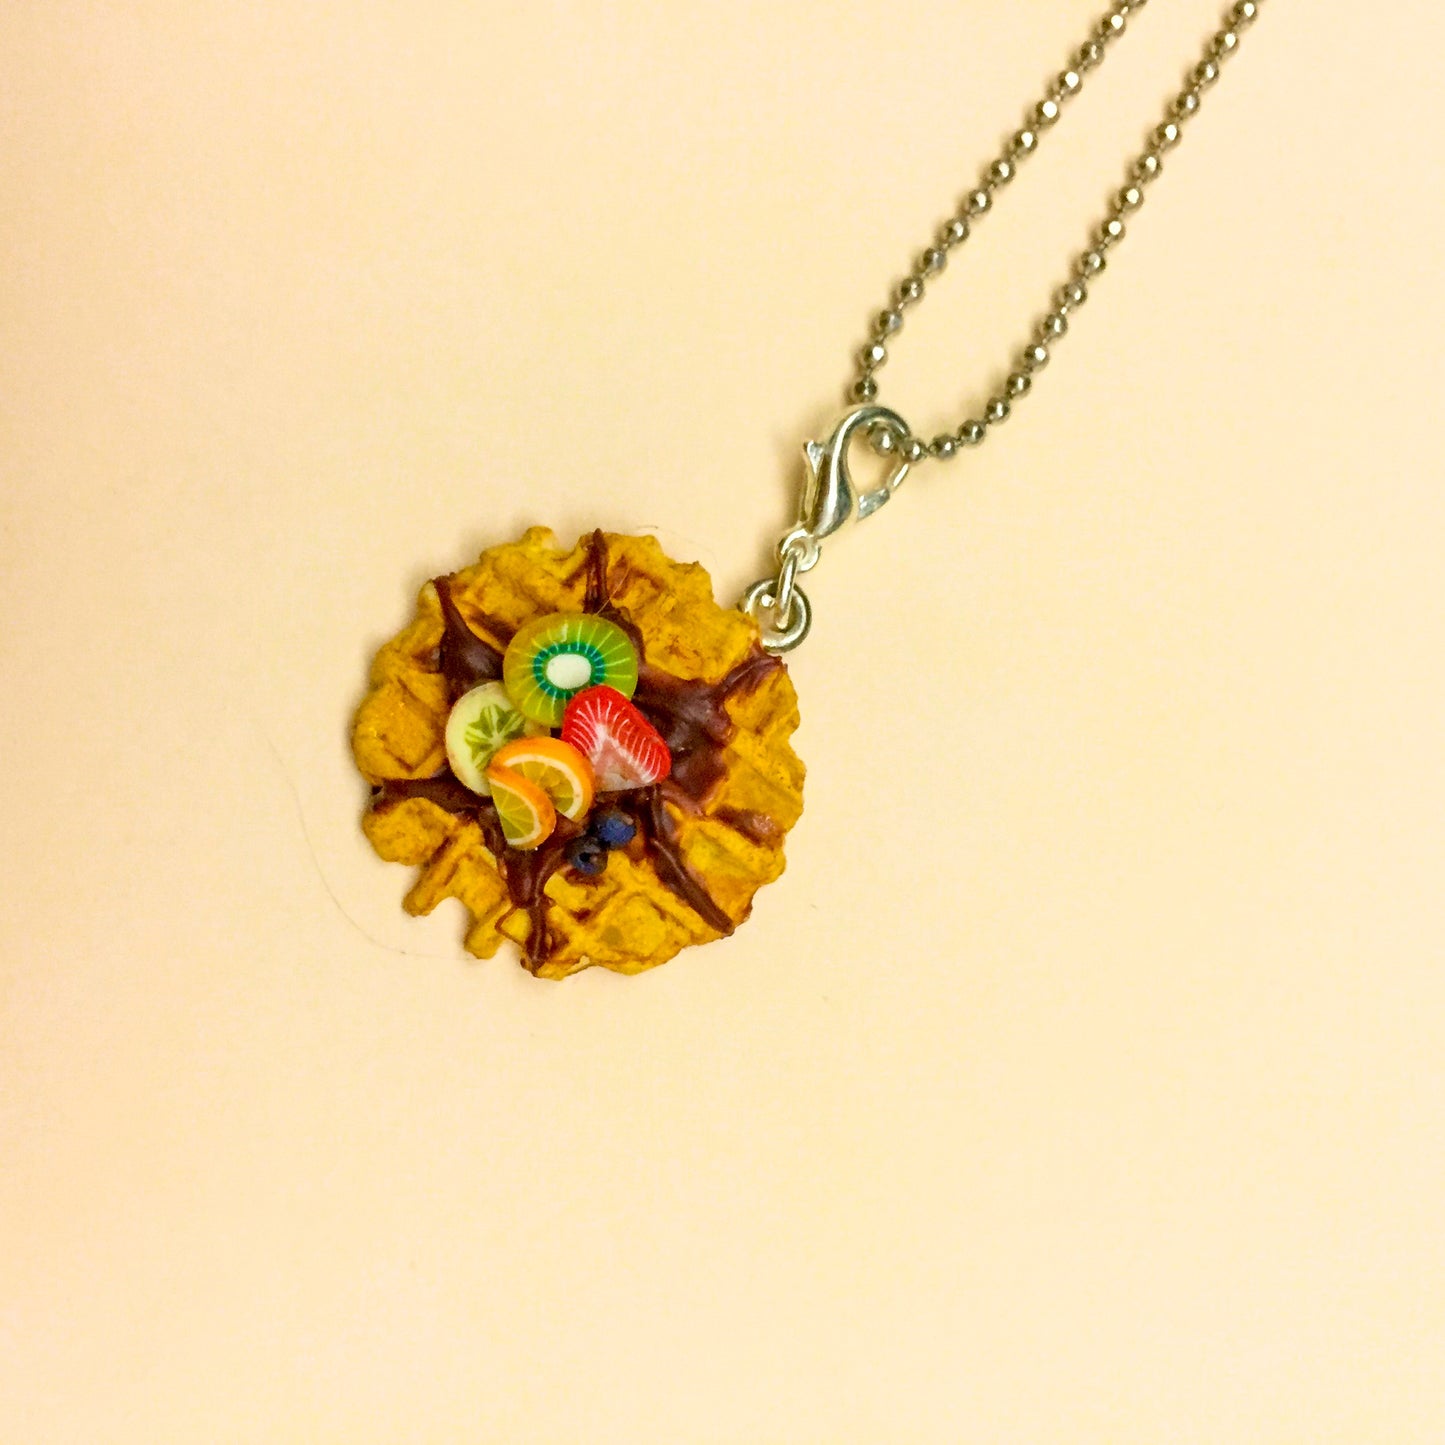 Round Chocolate Dripped Waffle Miniature Charm Pendant Necklace